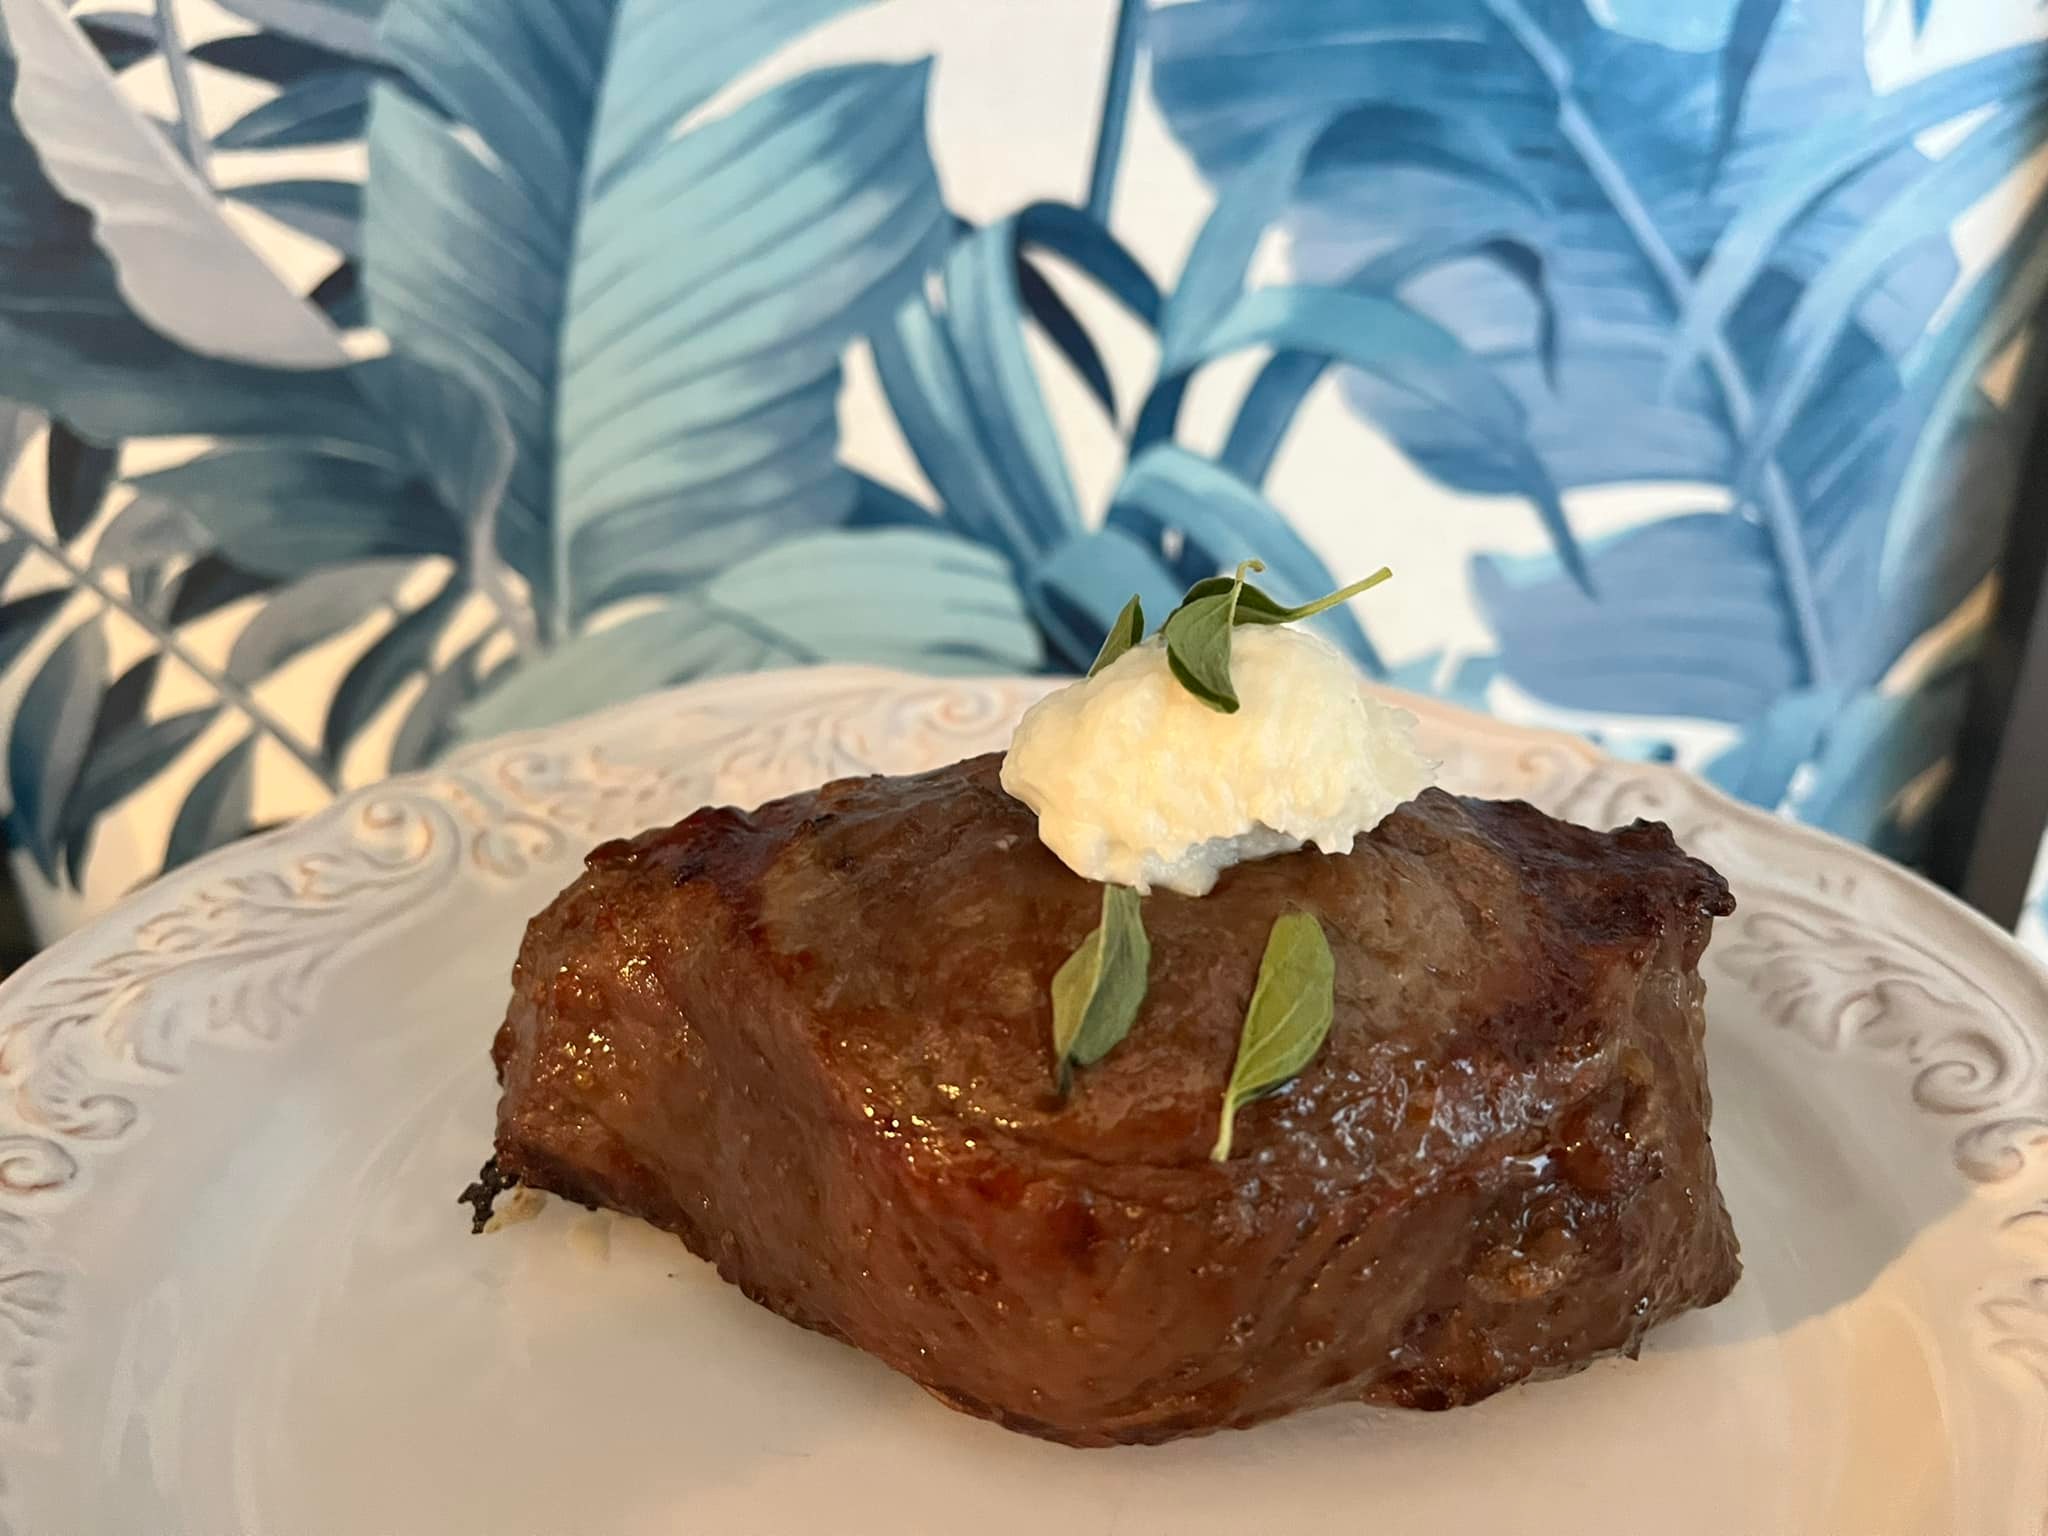 Air fryer steak recipe tested from Food Network